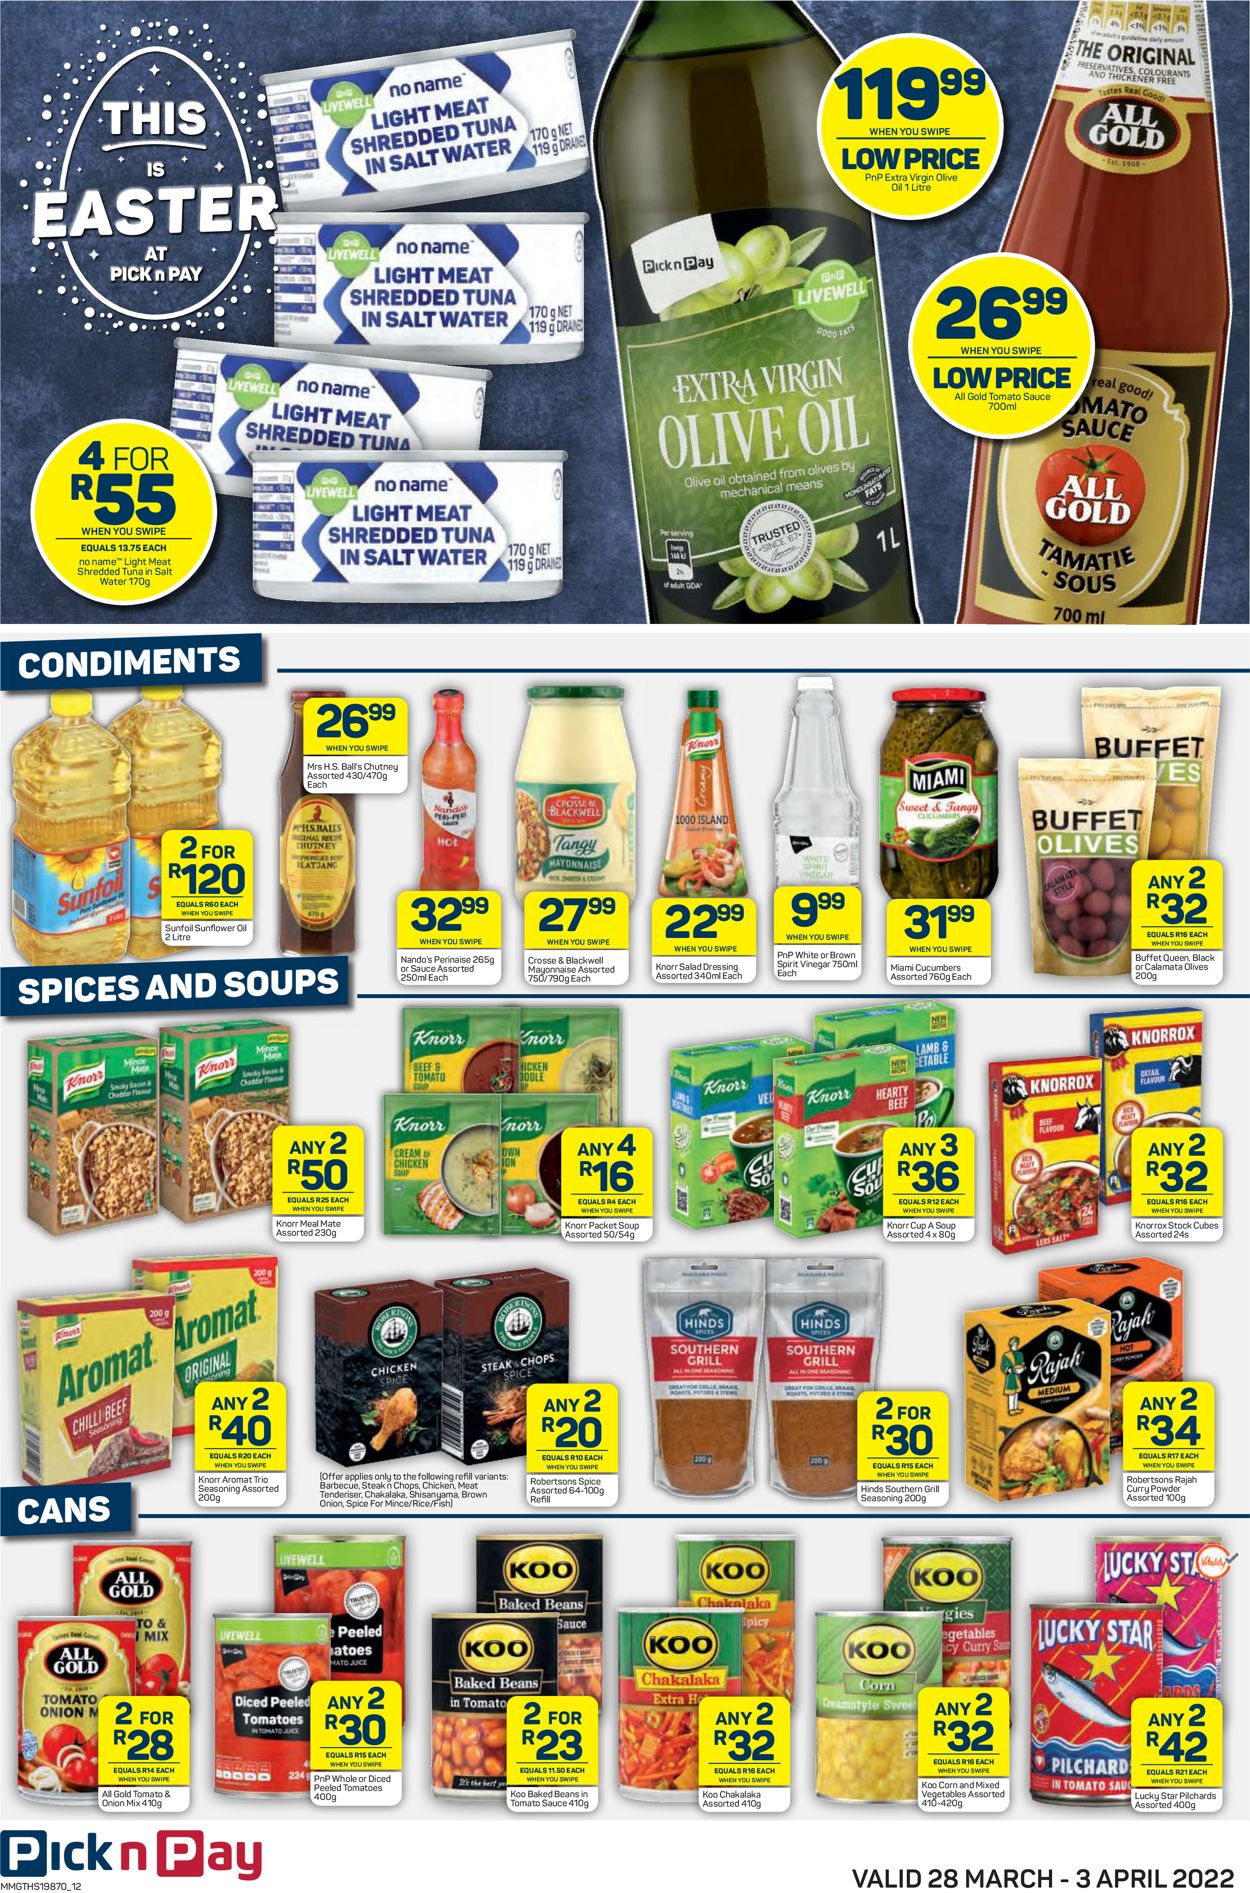 Pick n Pay EASTER 2022 Catalogue - 2022/03/28-2022/04/03 (Page 12)